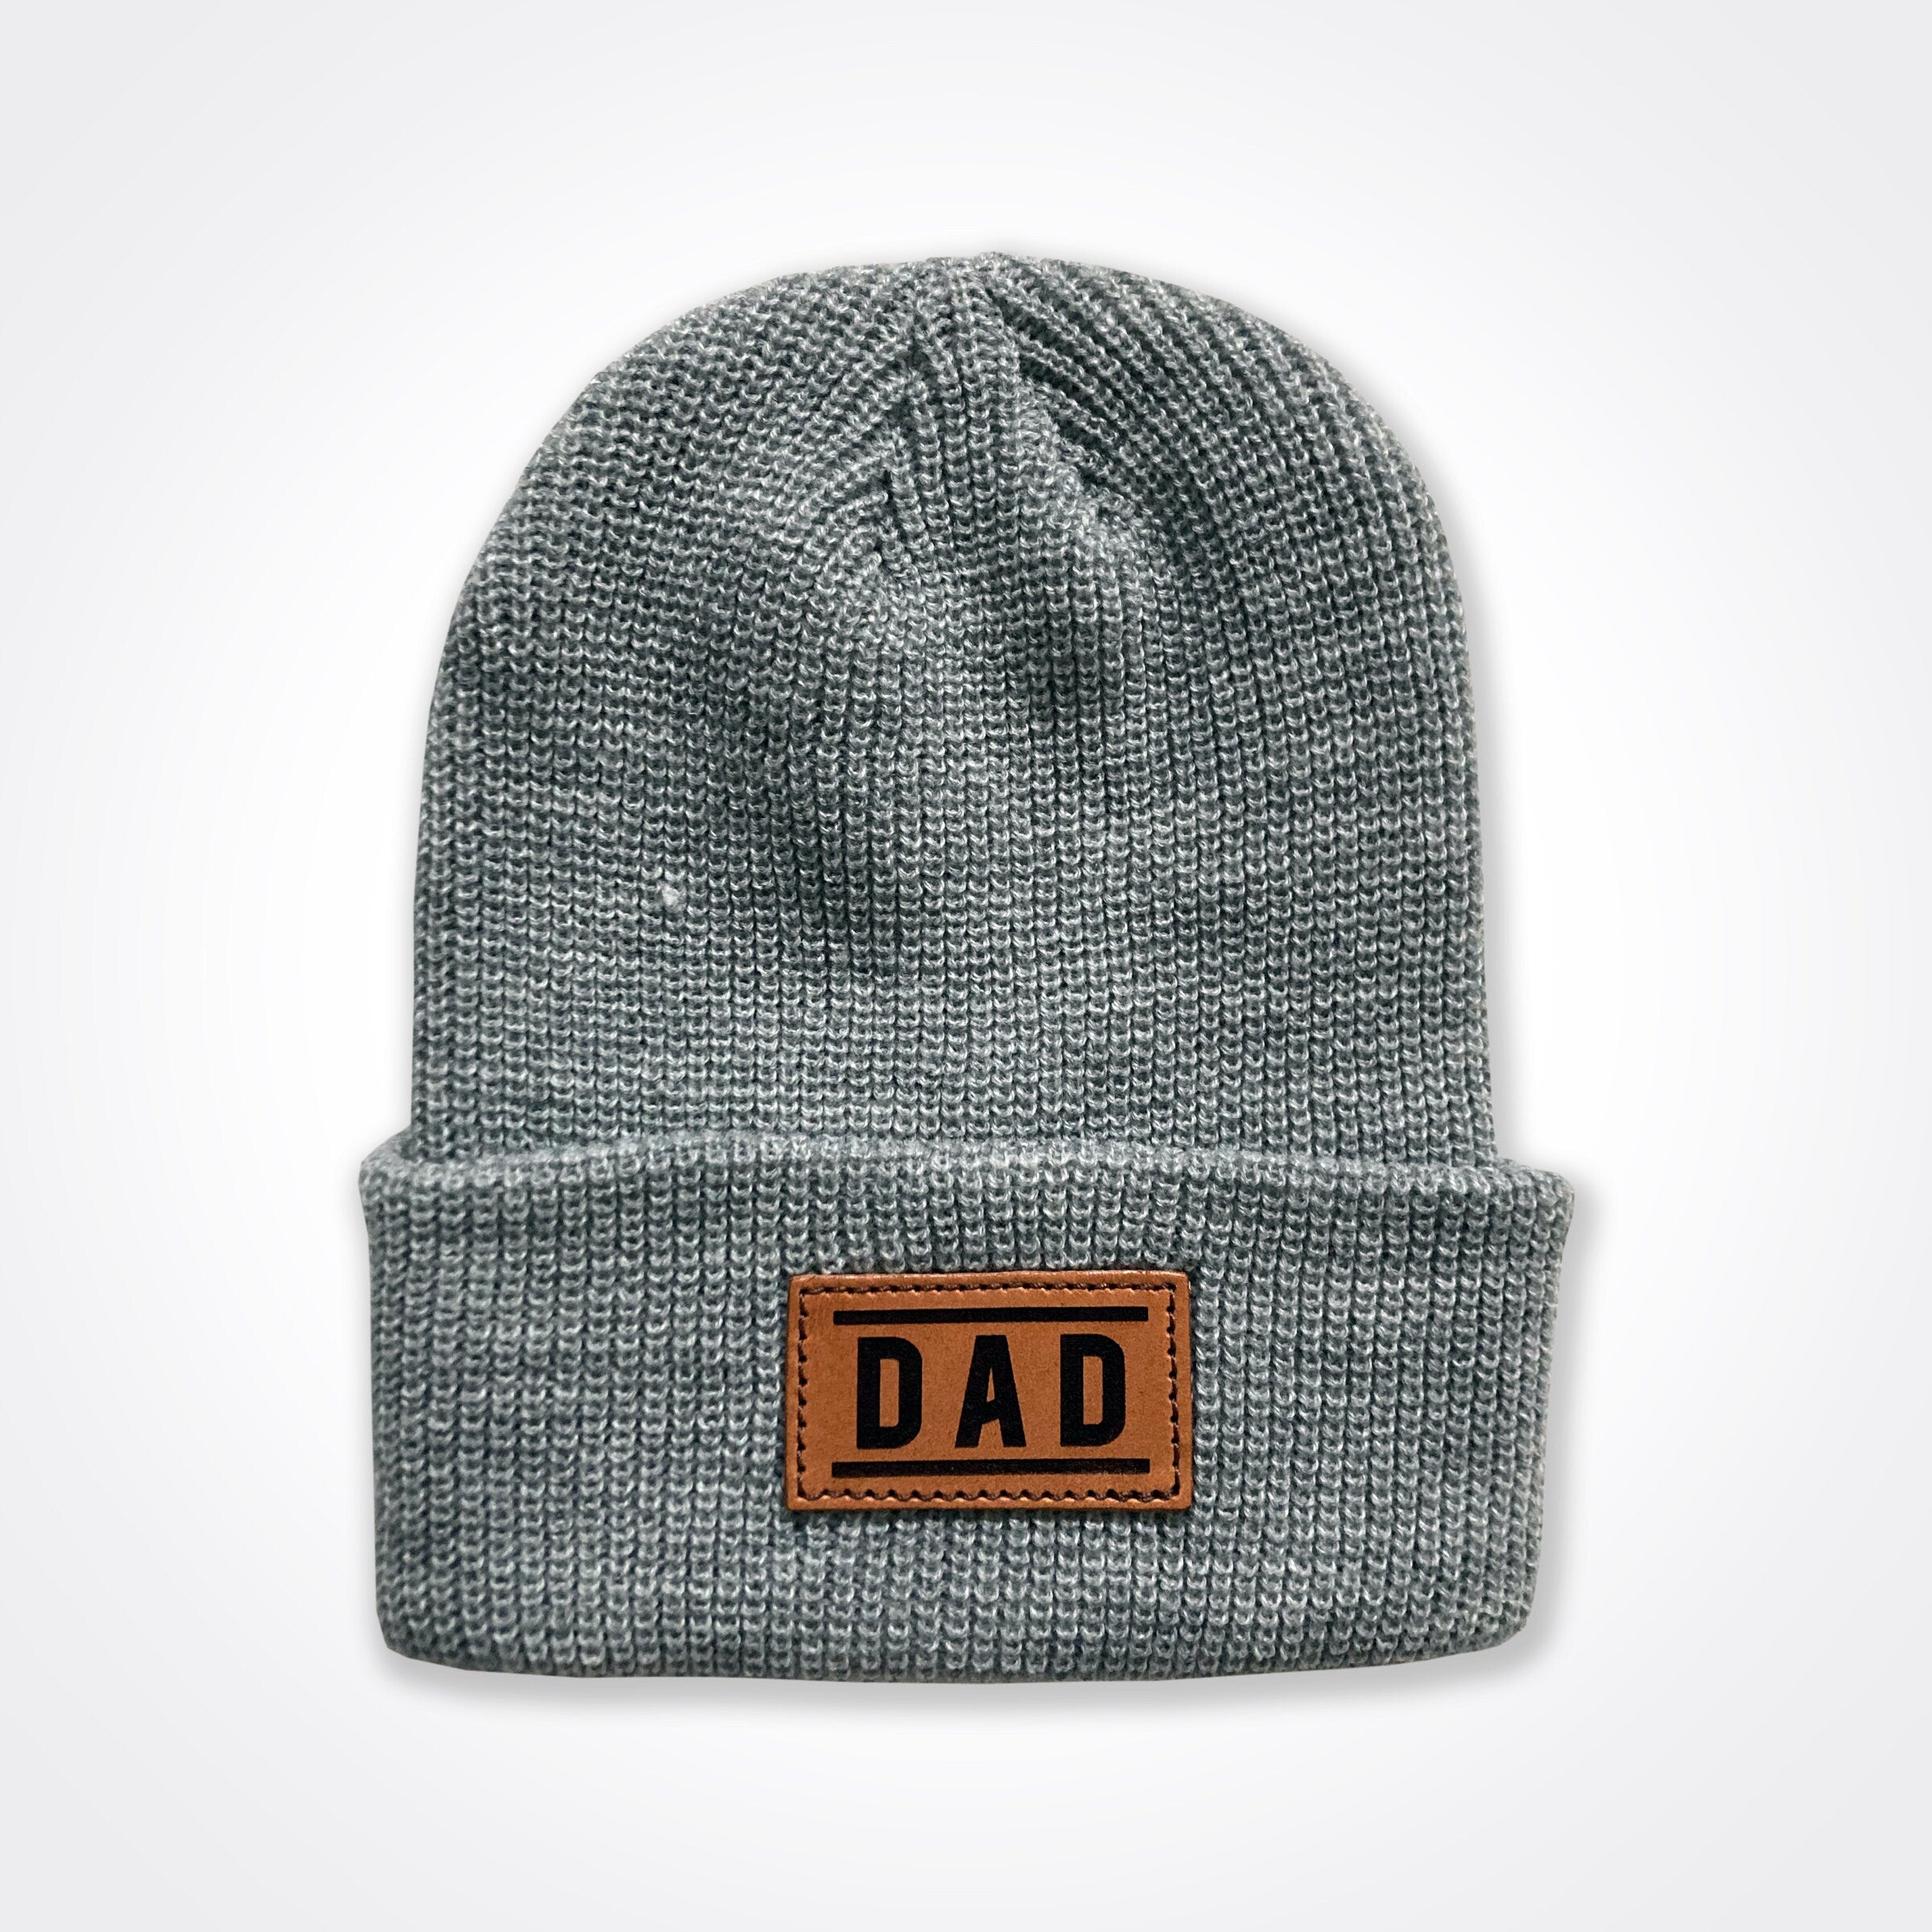 Dad Leather Patch Beanie In Black, Grey & Light Grey, Classic Winter Hat, Dad hat, Dad Gift, Dad of both